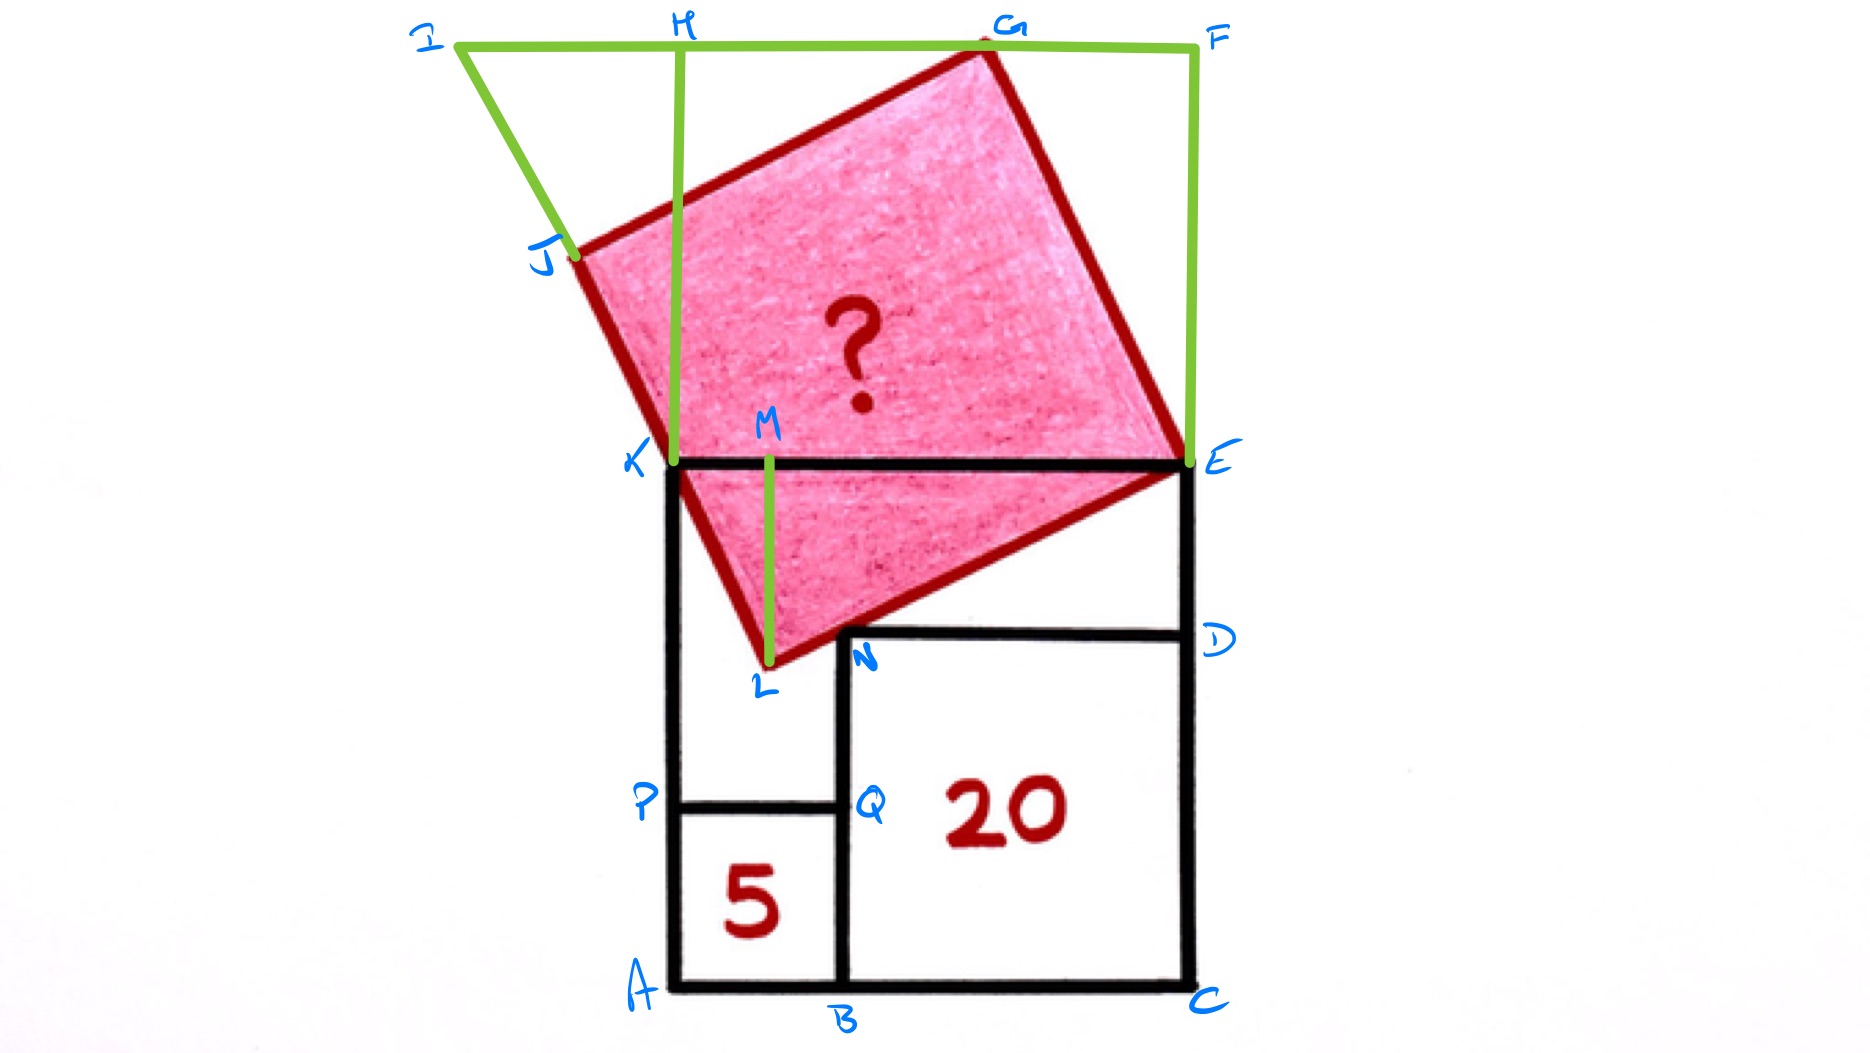 Four squares II labelled